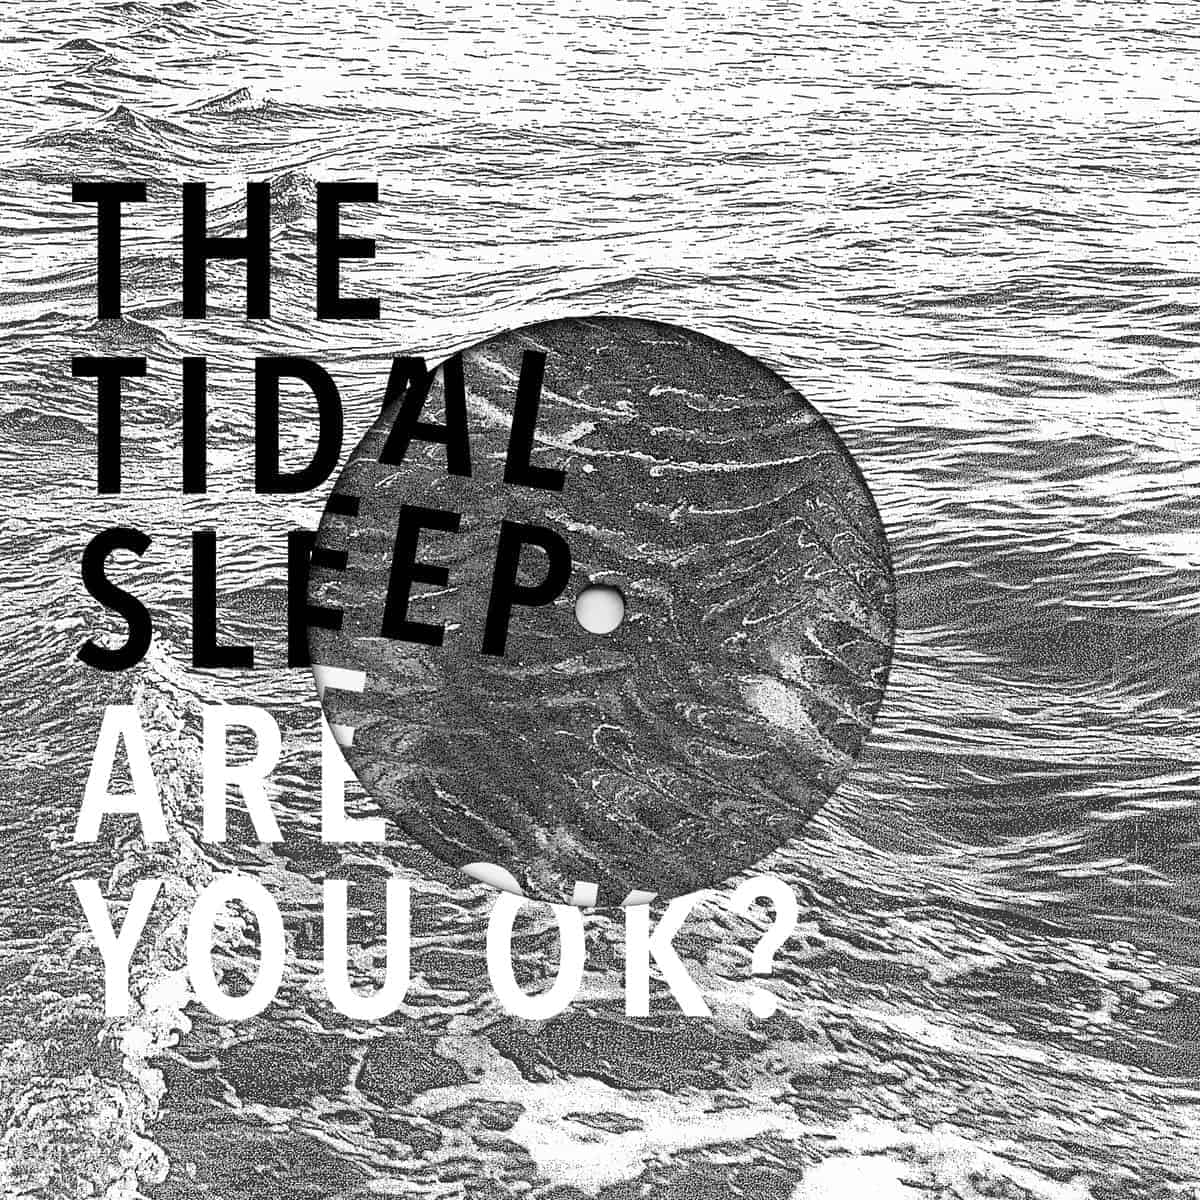 The Tidal Sleep / Svalbard split 7" Pressing Info: 150x clear (SOLD OUT), 450x white all copies come with a die-cut cover and download!